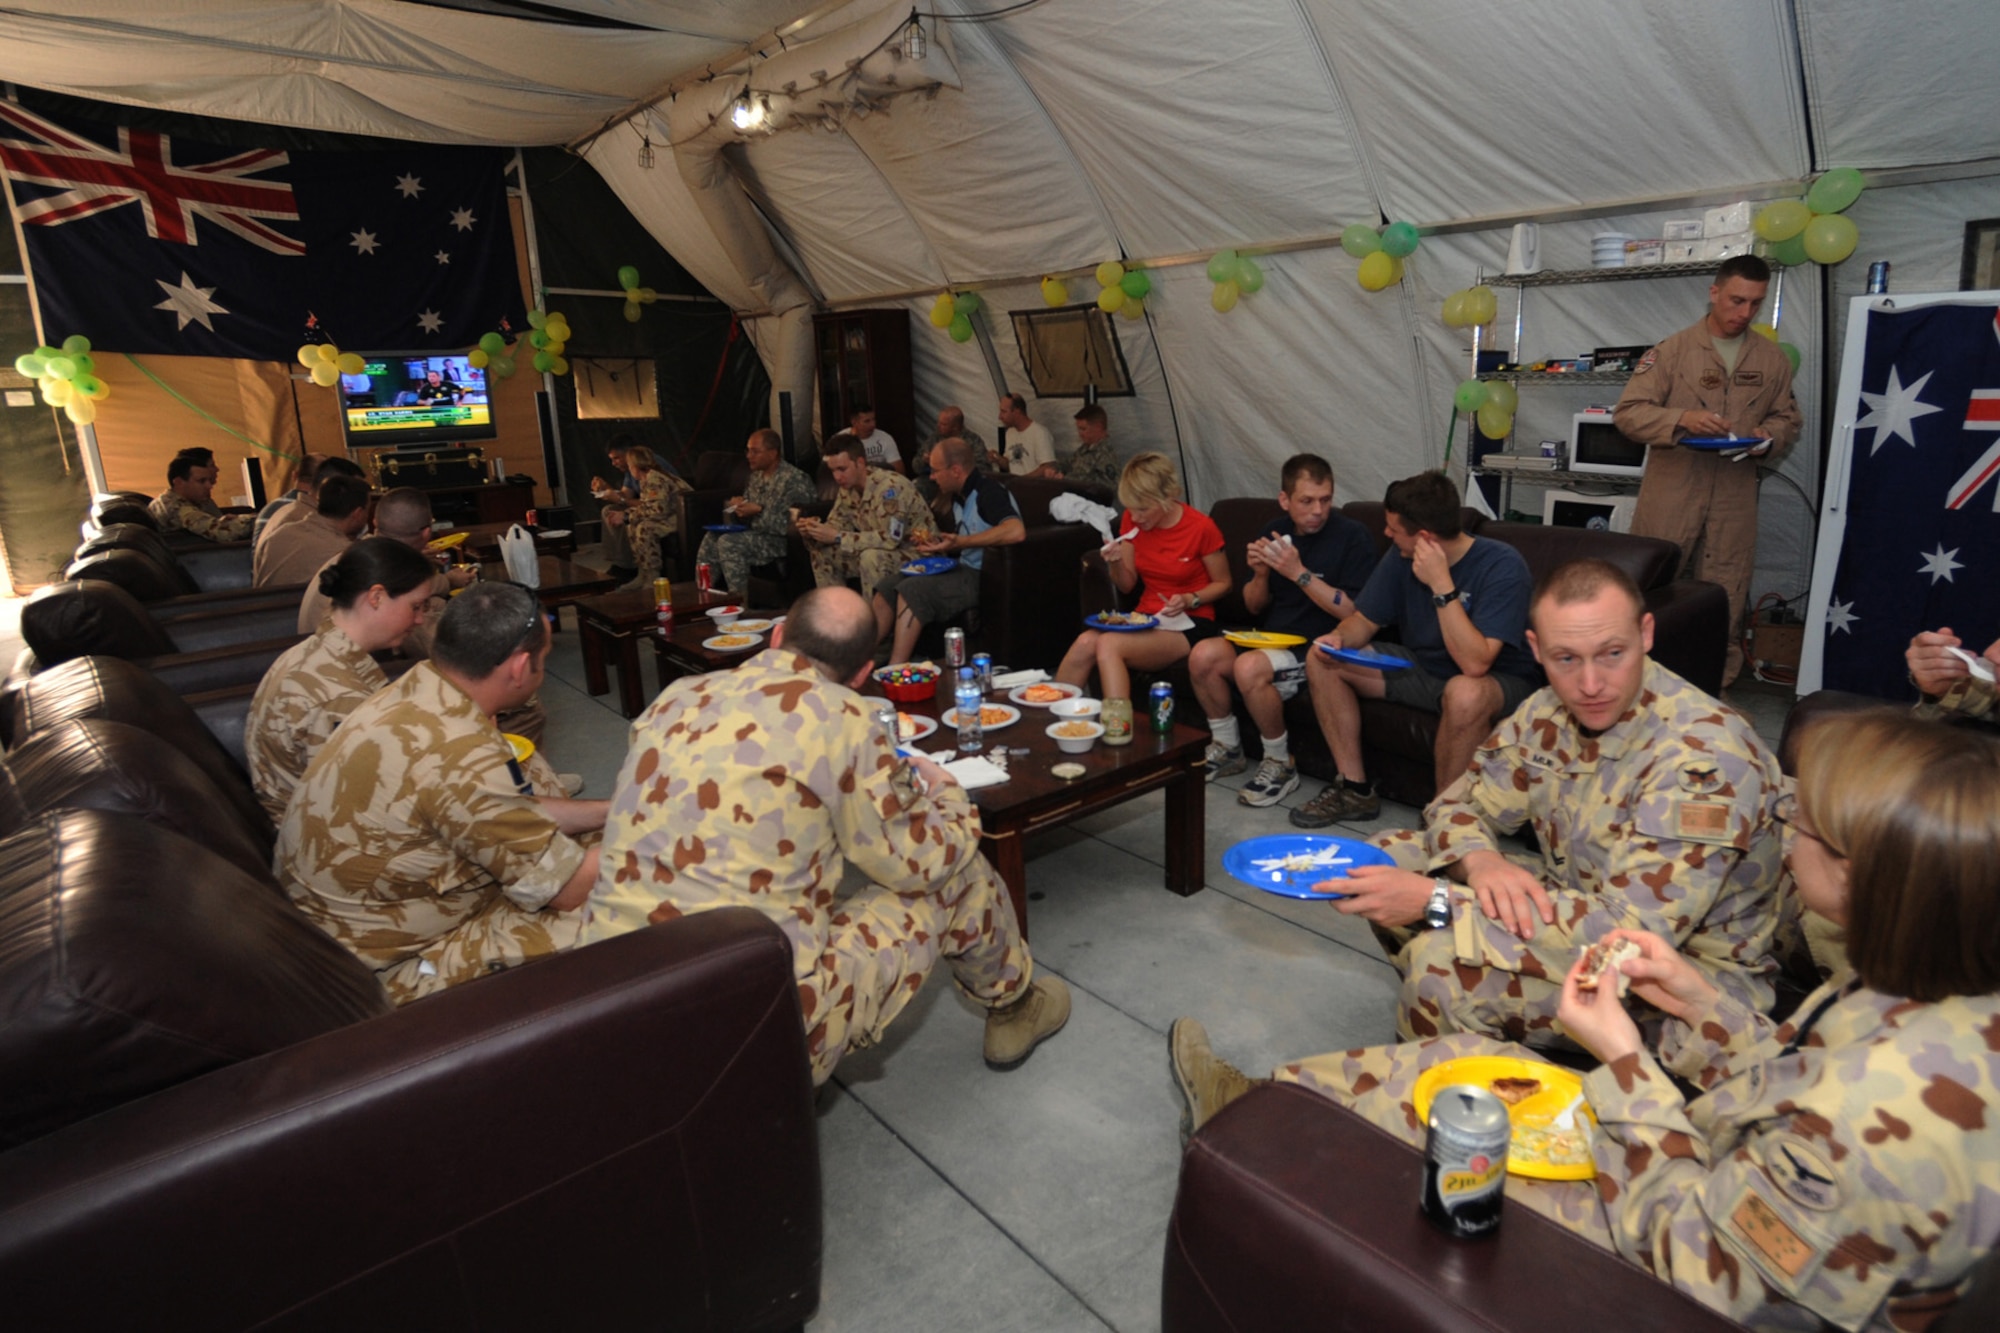 An Australian military contingent celebrated Australia Day at a non-disclosed Southwest Asia location, Jan. 26, 2010. The event included a barbecue, mingling with other Coalition forces and watching a broadcast of an Australian team competing in a cricket match. Celebrated annually, the day commemorates the arrival of the First Fleet at Sydney Cove in 1788, the hoisting of the British flag there and the proclamation of British sovereignty over the eastern seaboard of Australia. (U.S. Air Force photo byTech. Sgt. Michelle Larche)[RELEASED]